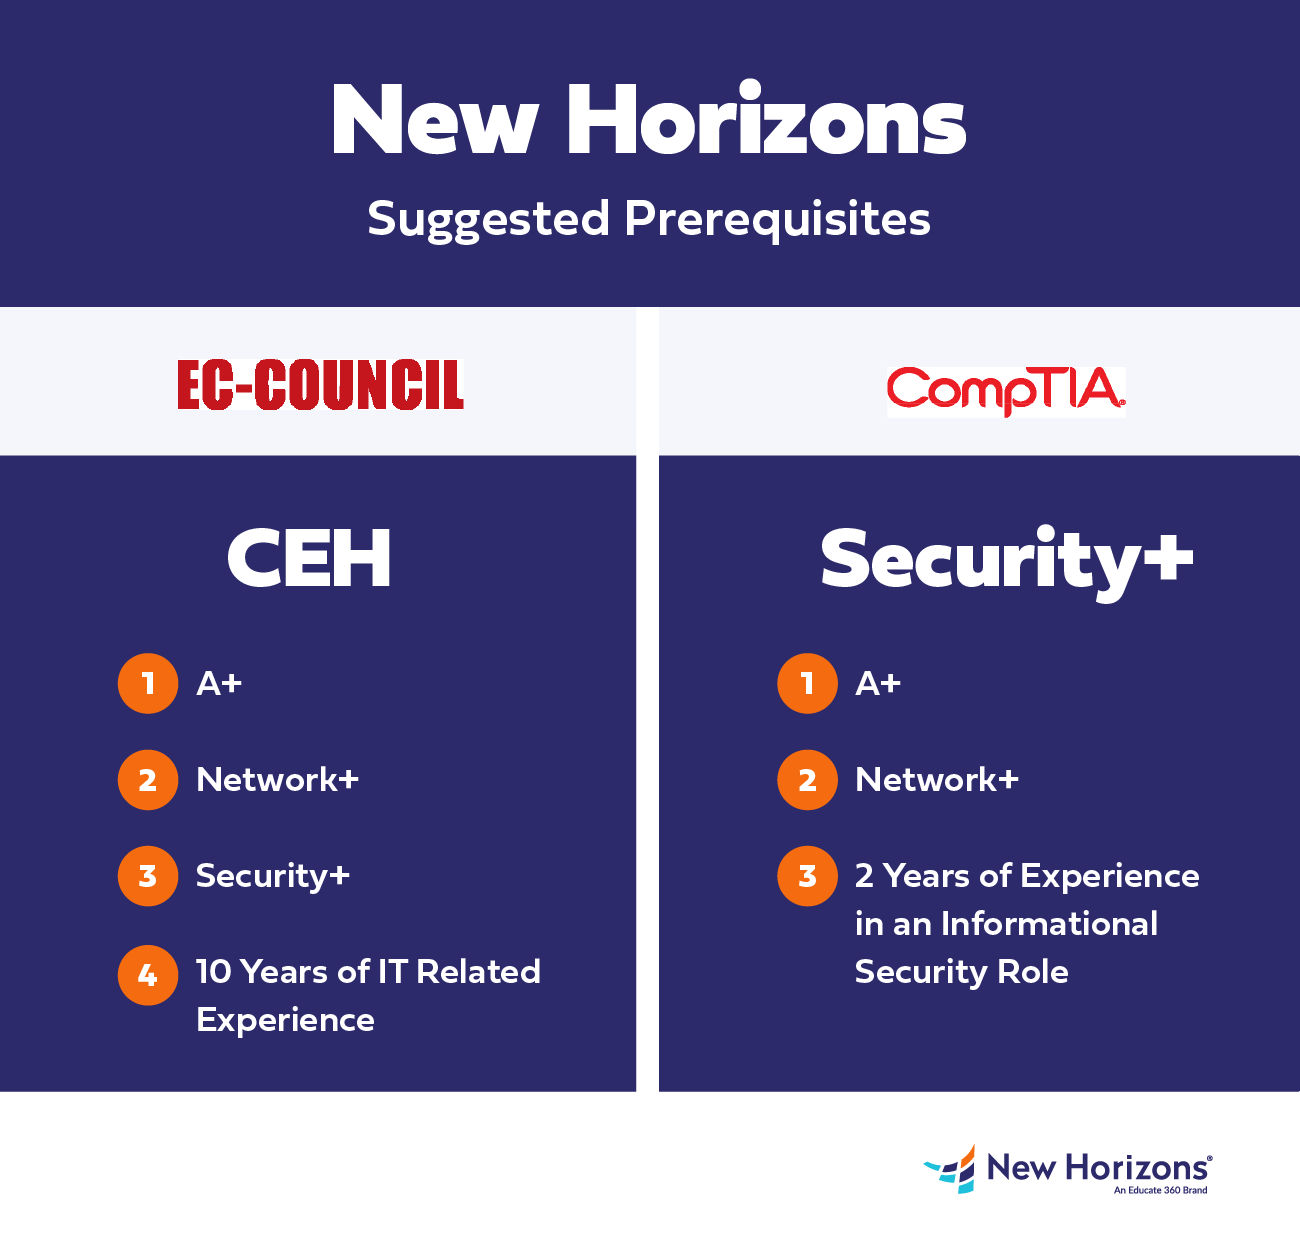 Prerequisites for CEH and Security+ Certifications